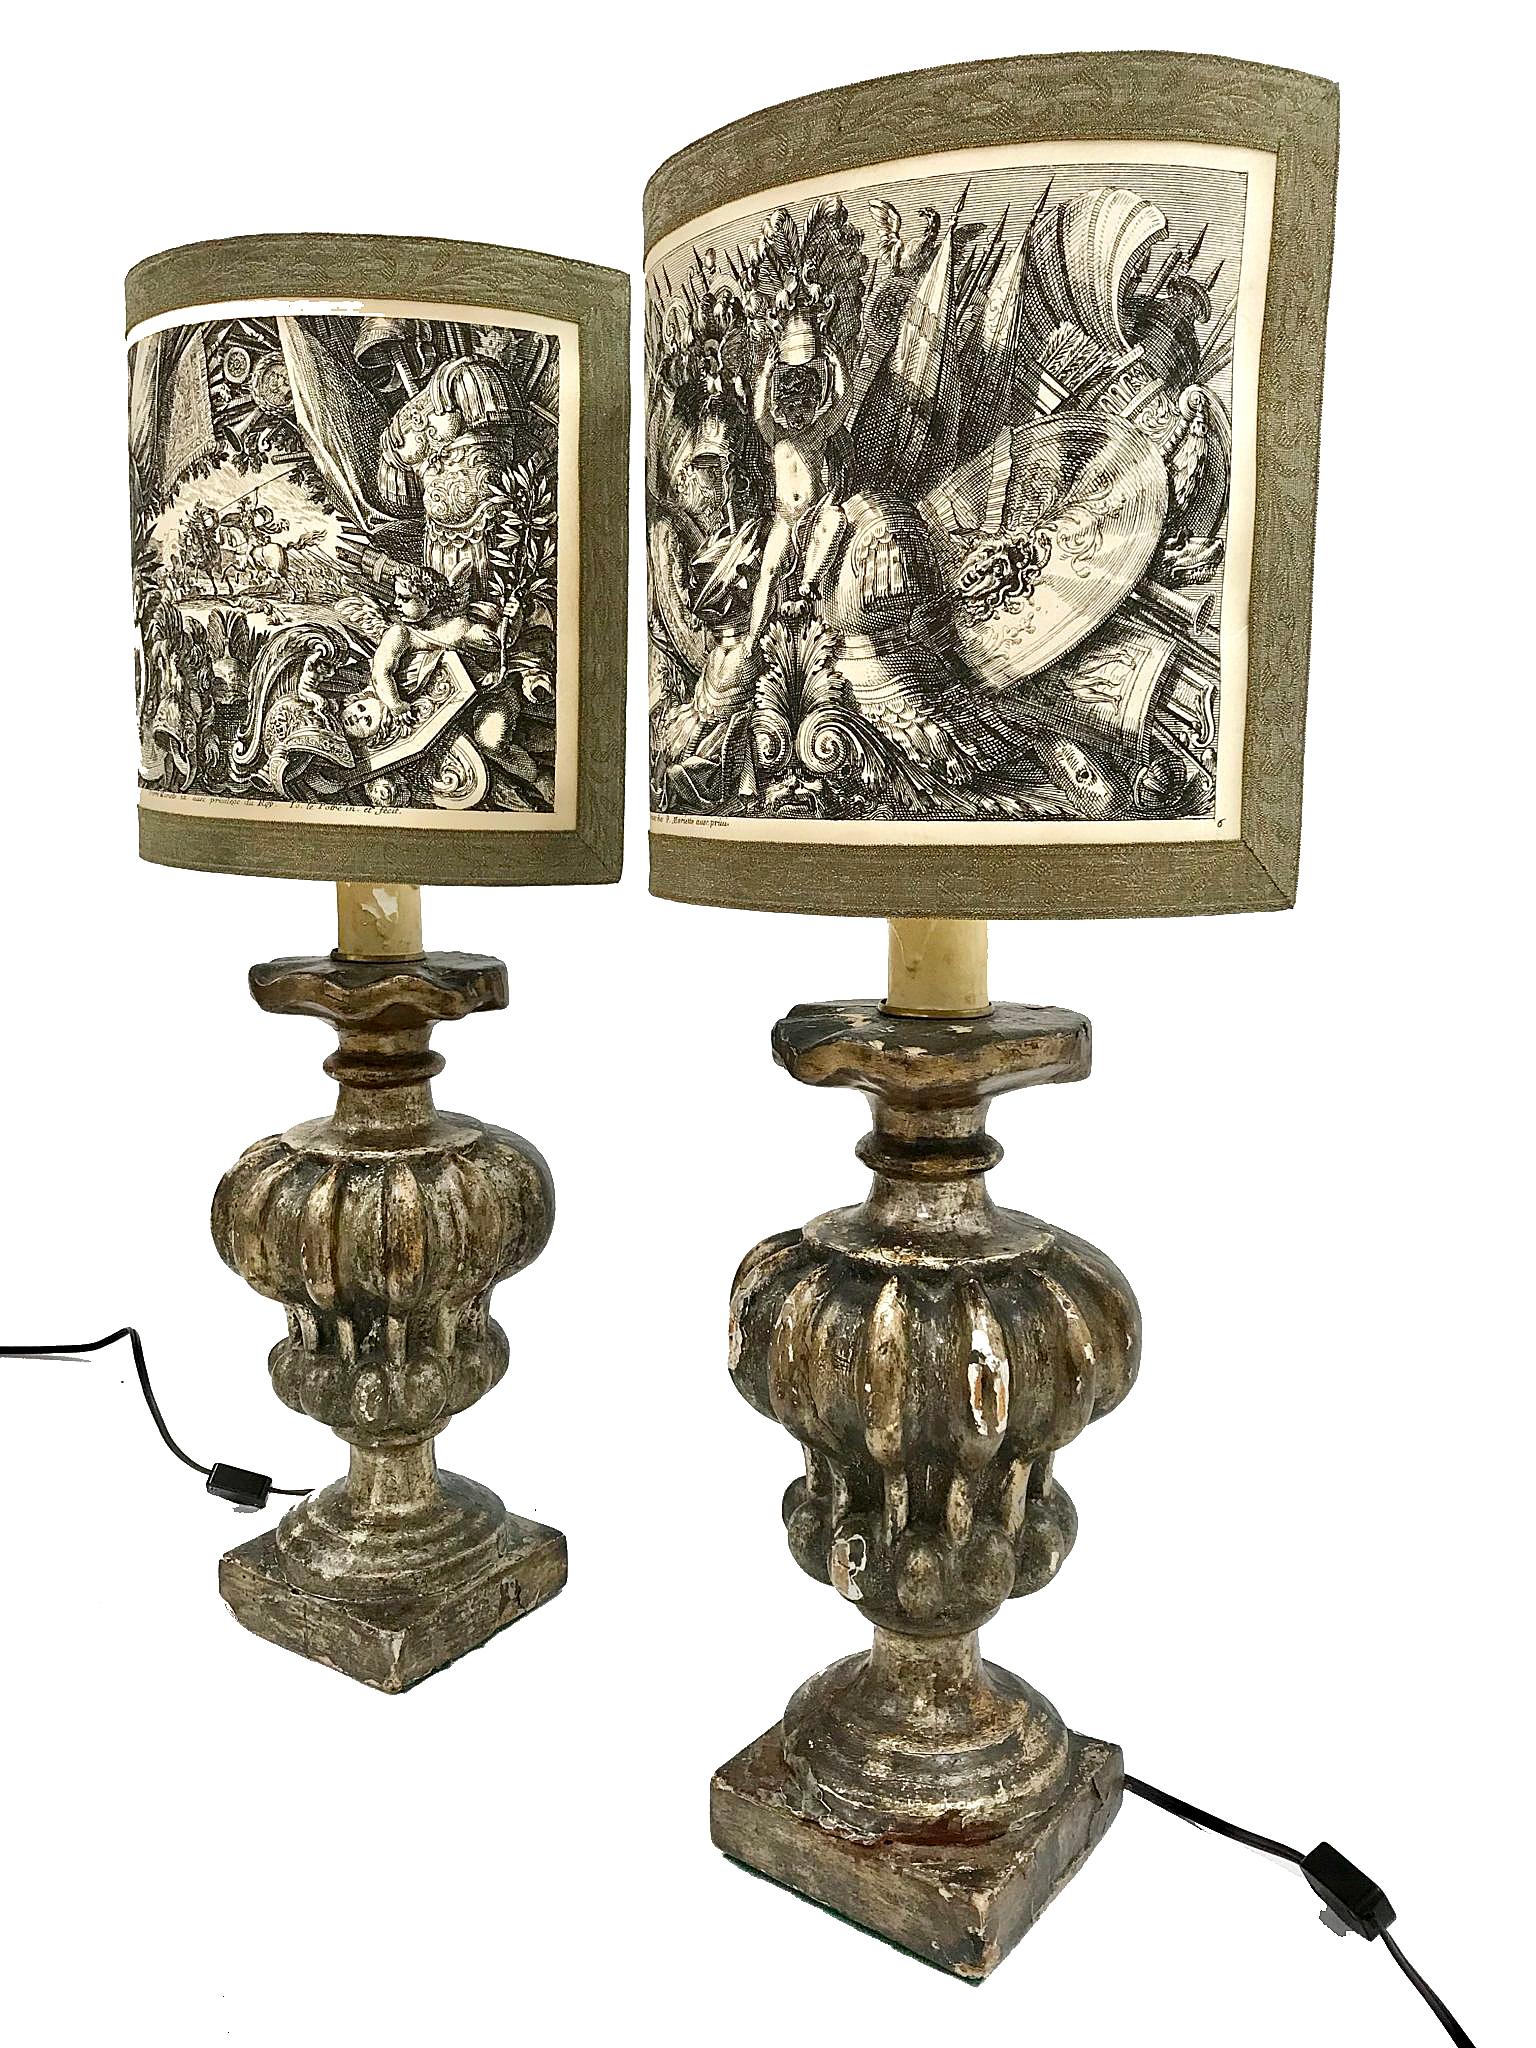 Pair of 19th-century Italian lamps with an Italian neoclassical shield shade. Scattered losses to wood and distressing. Purchased in Florence. 